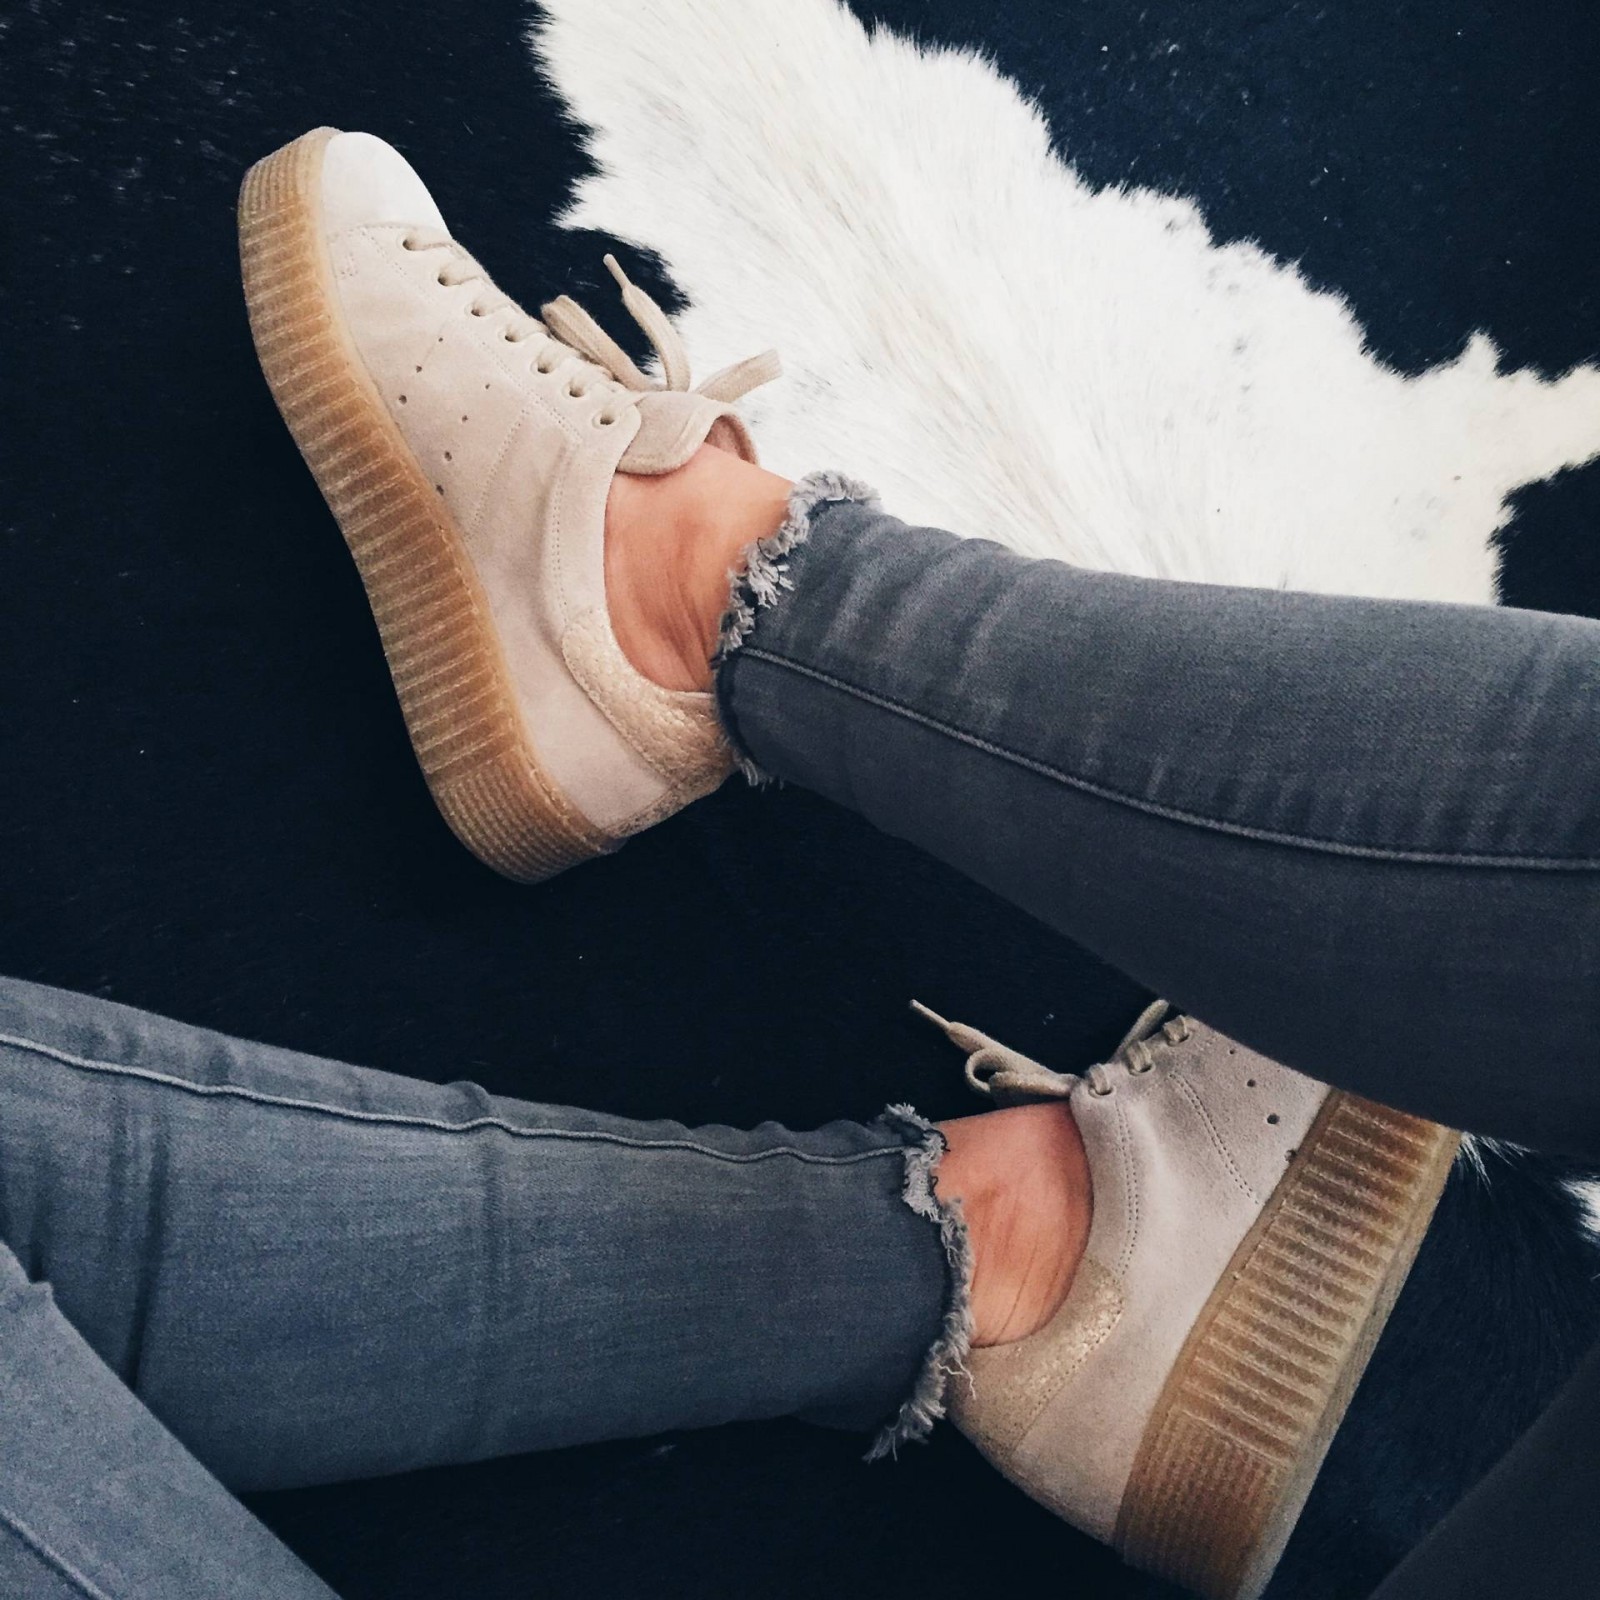 New in: Look-a-like Puma creepers - OurFavourites